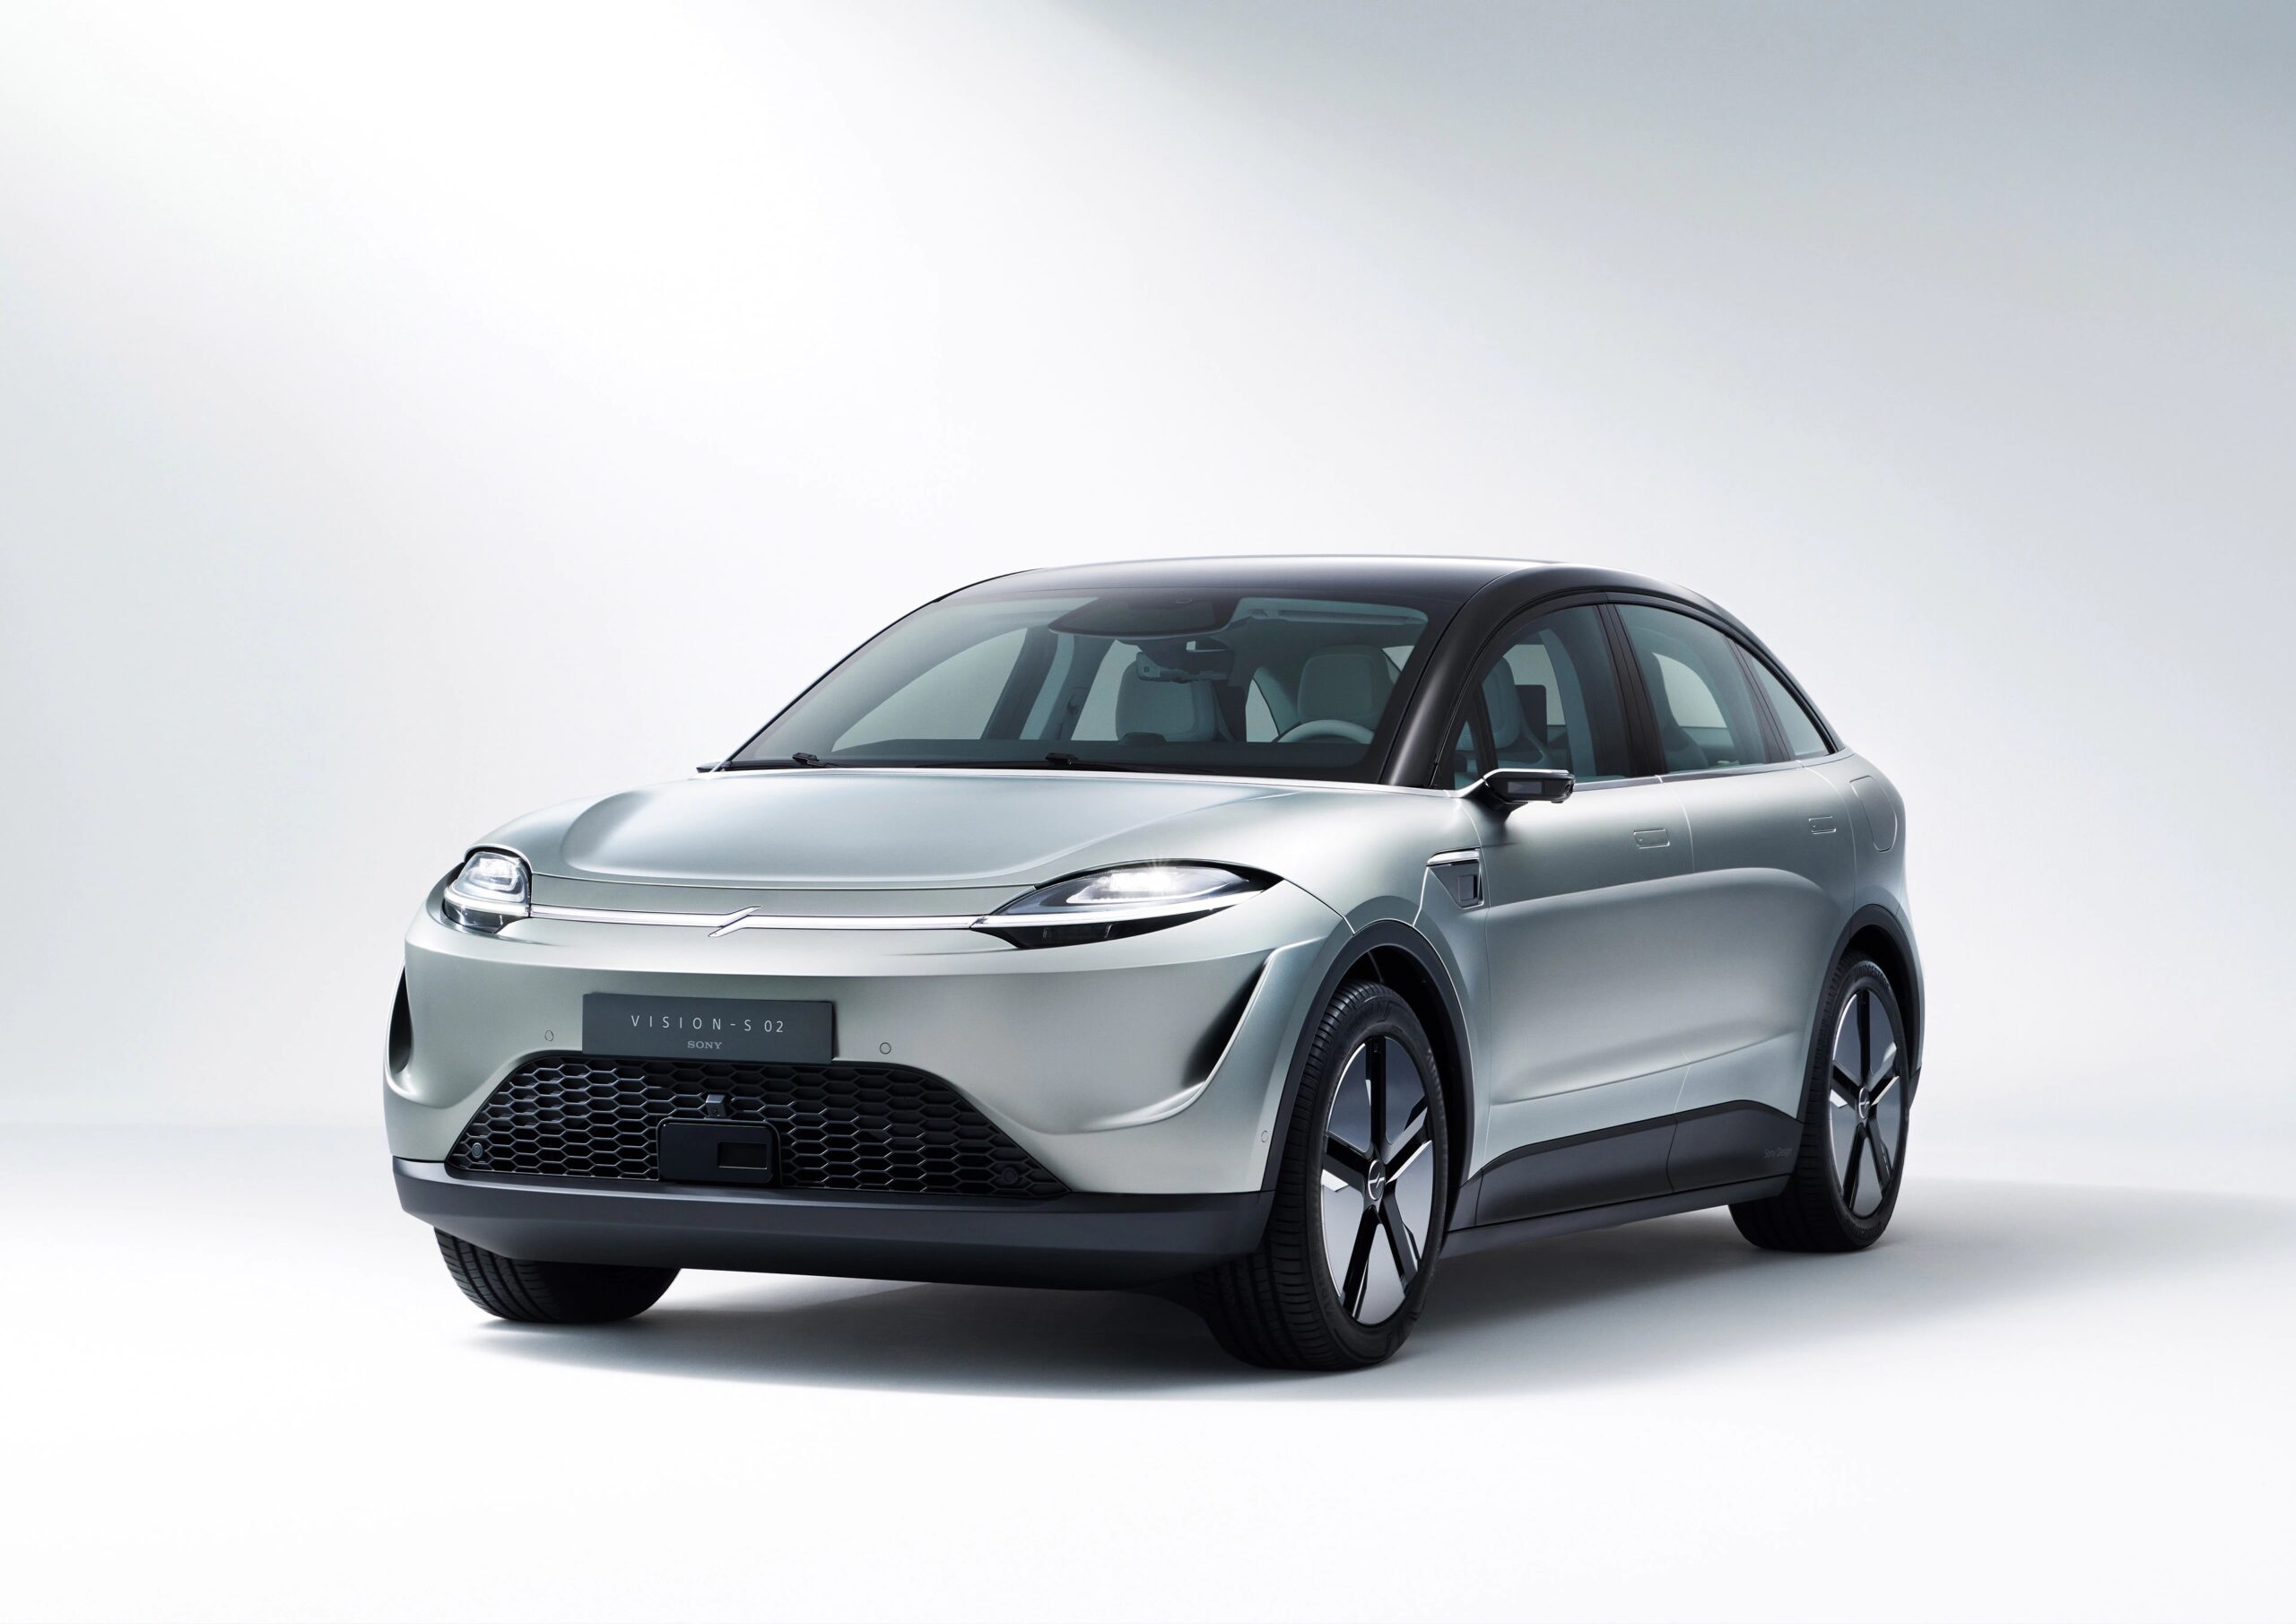 Sony Vision scaled - Sony reveals Vision-S 02 electric SUV at CES 2022